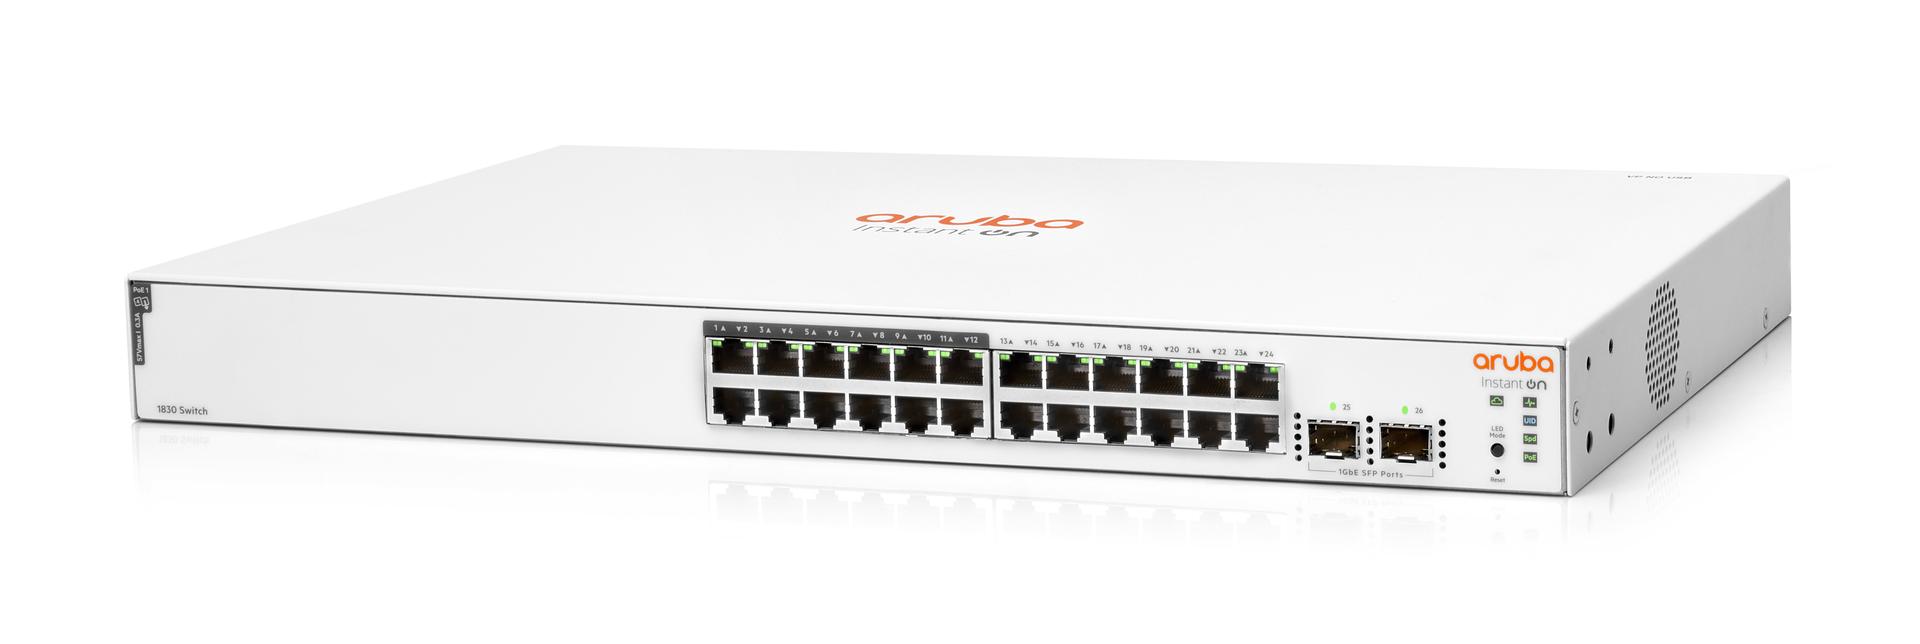 Aruba Instant On 1830 24-Port Switch Front Angle